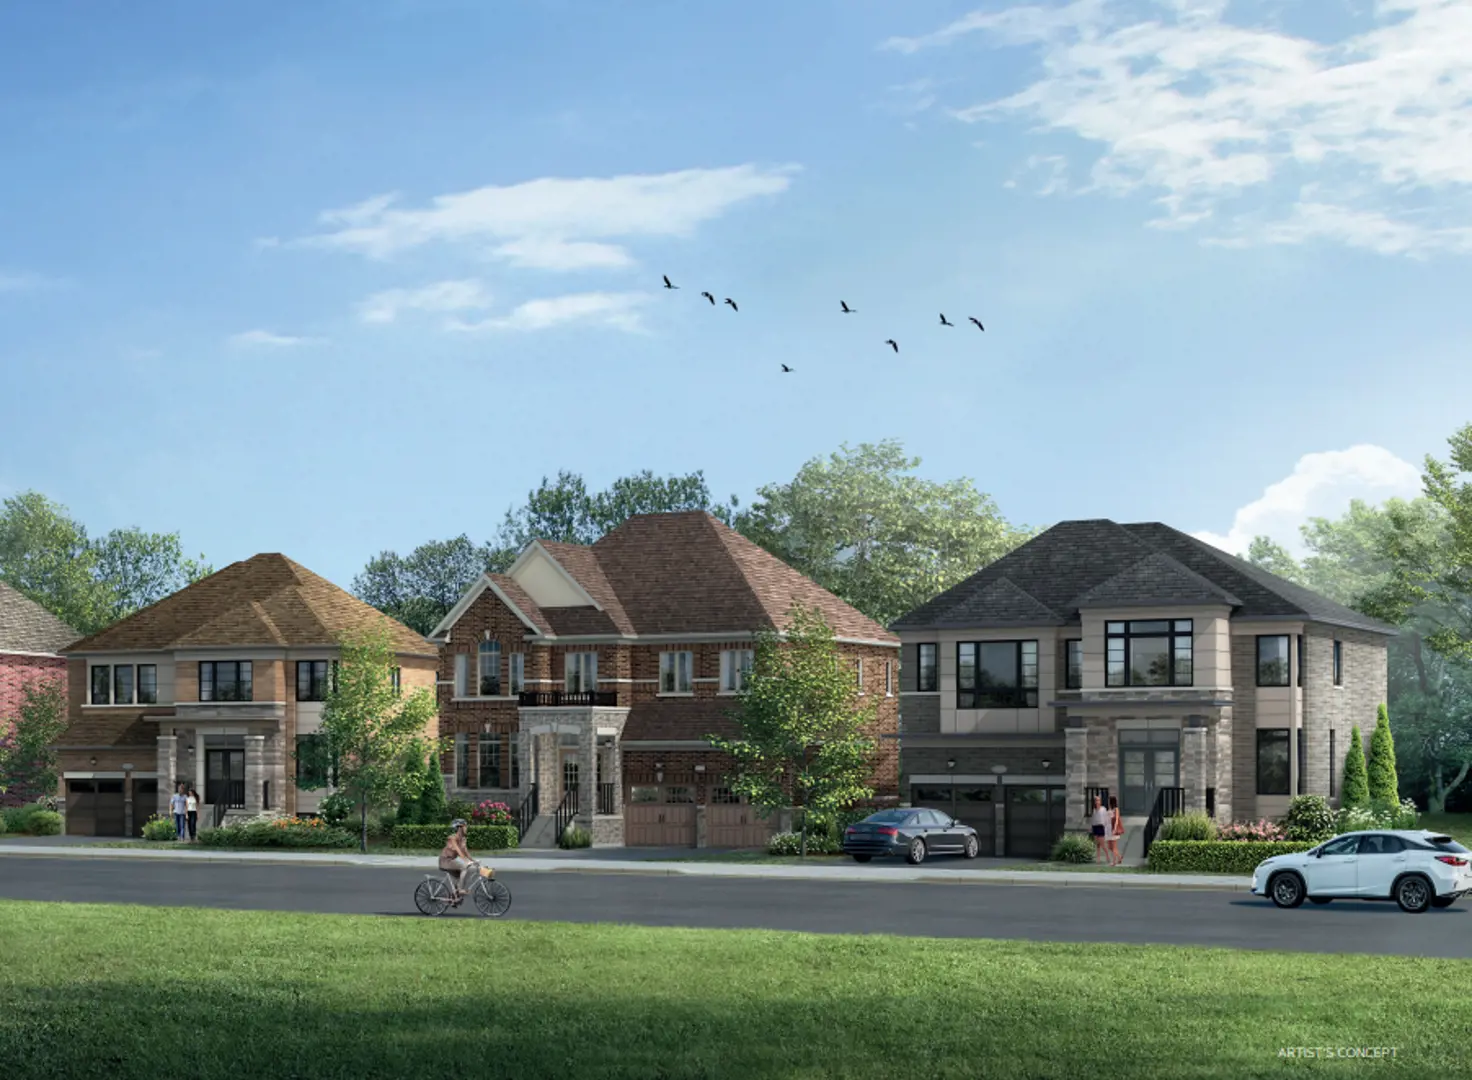 Glenway on the Green - Phase 6 located at Glenway Community | 470 Crossland Gate, Newmarket, ON image